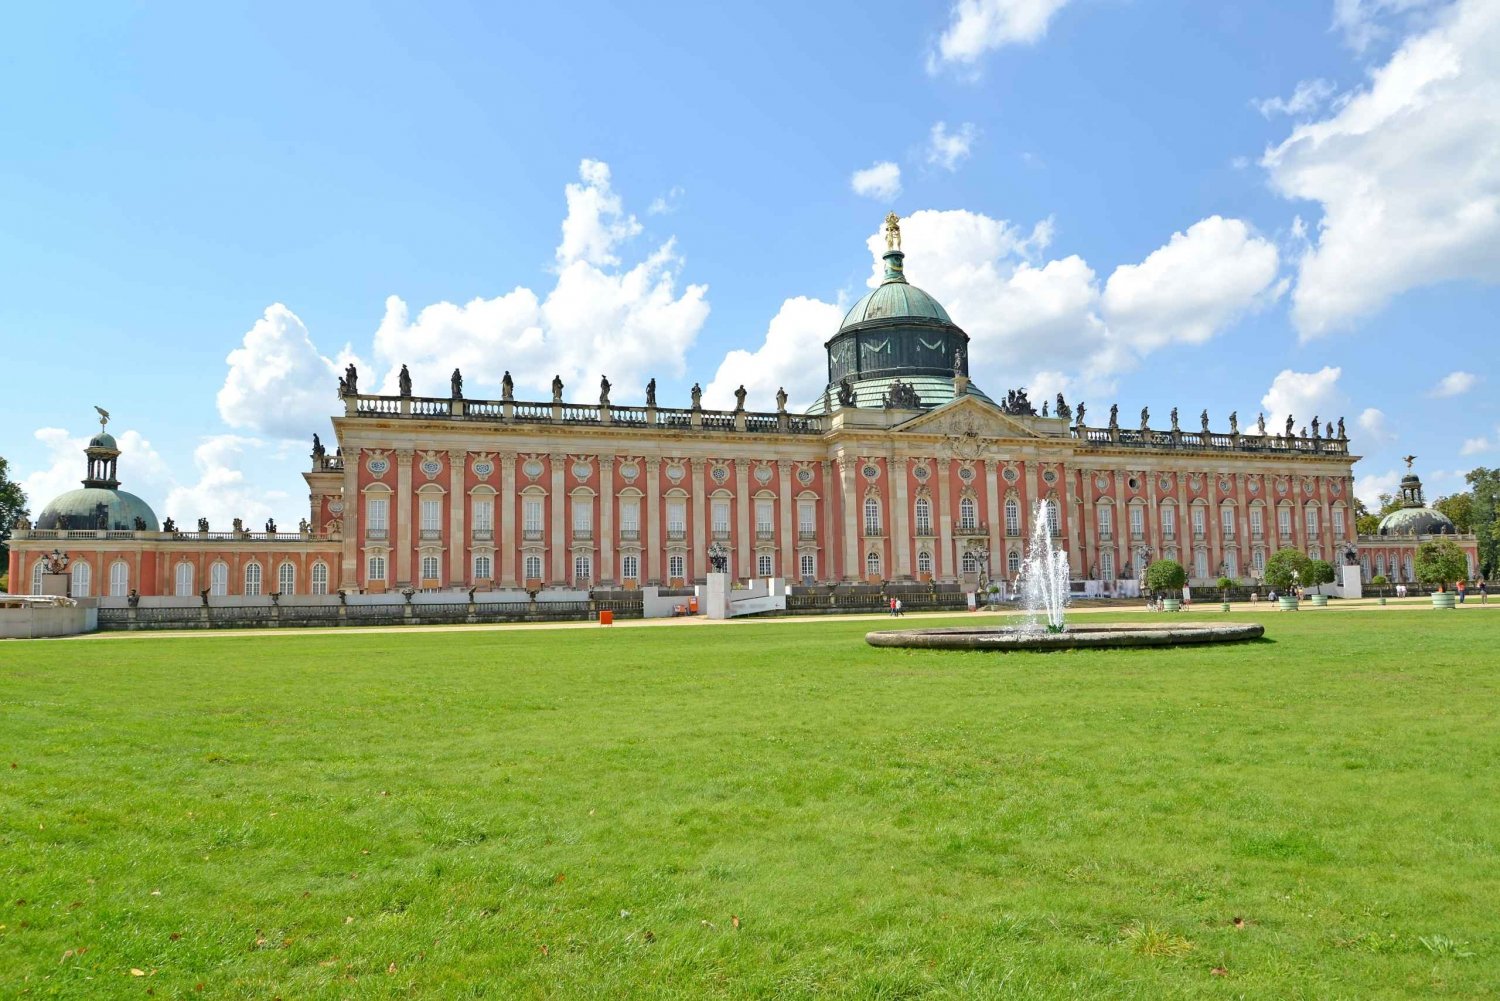 Private Tour of Potsdam with a Guide